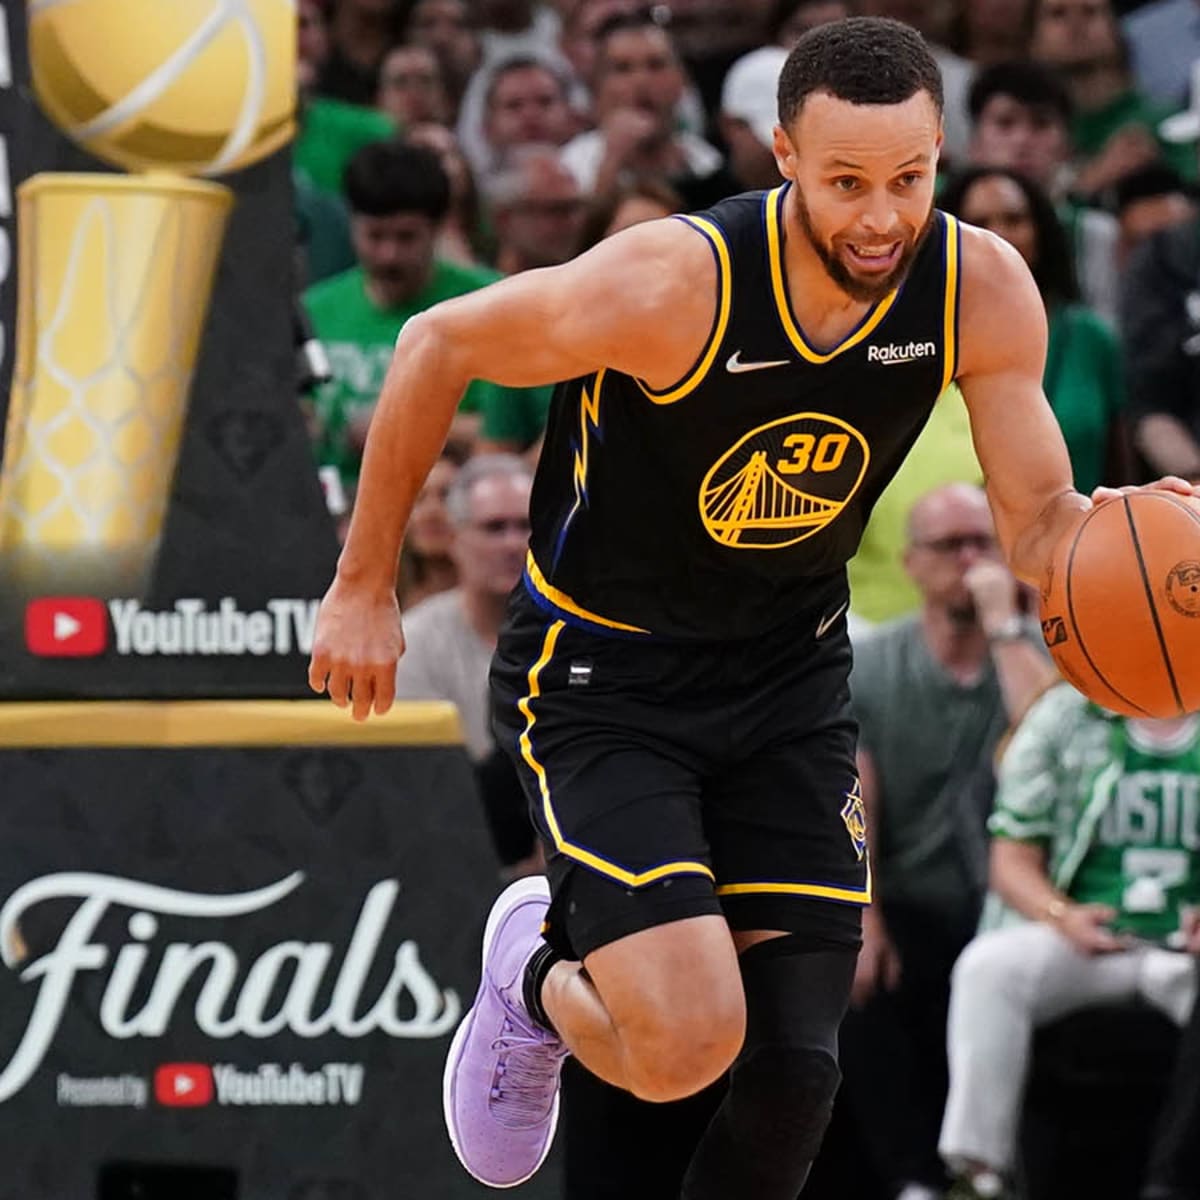 Stephen Curry Is Having One Of The Best NBA Finals Performances Of